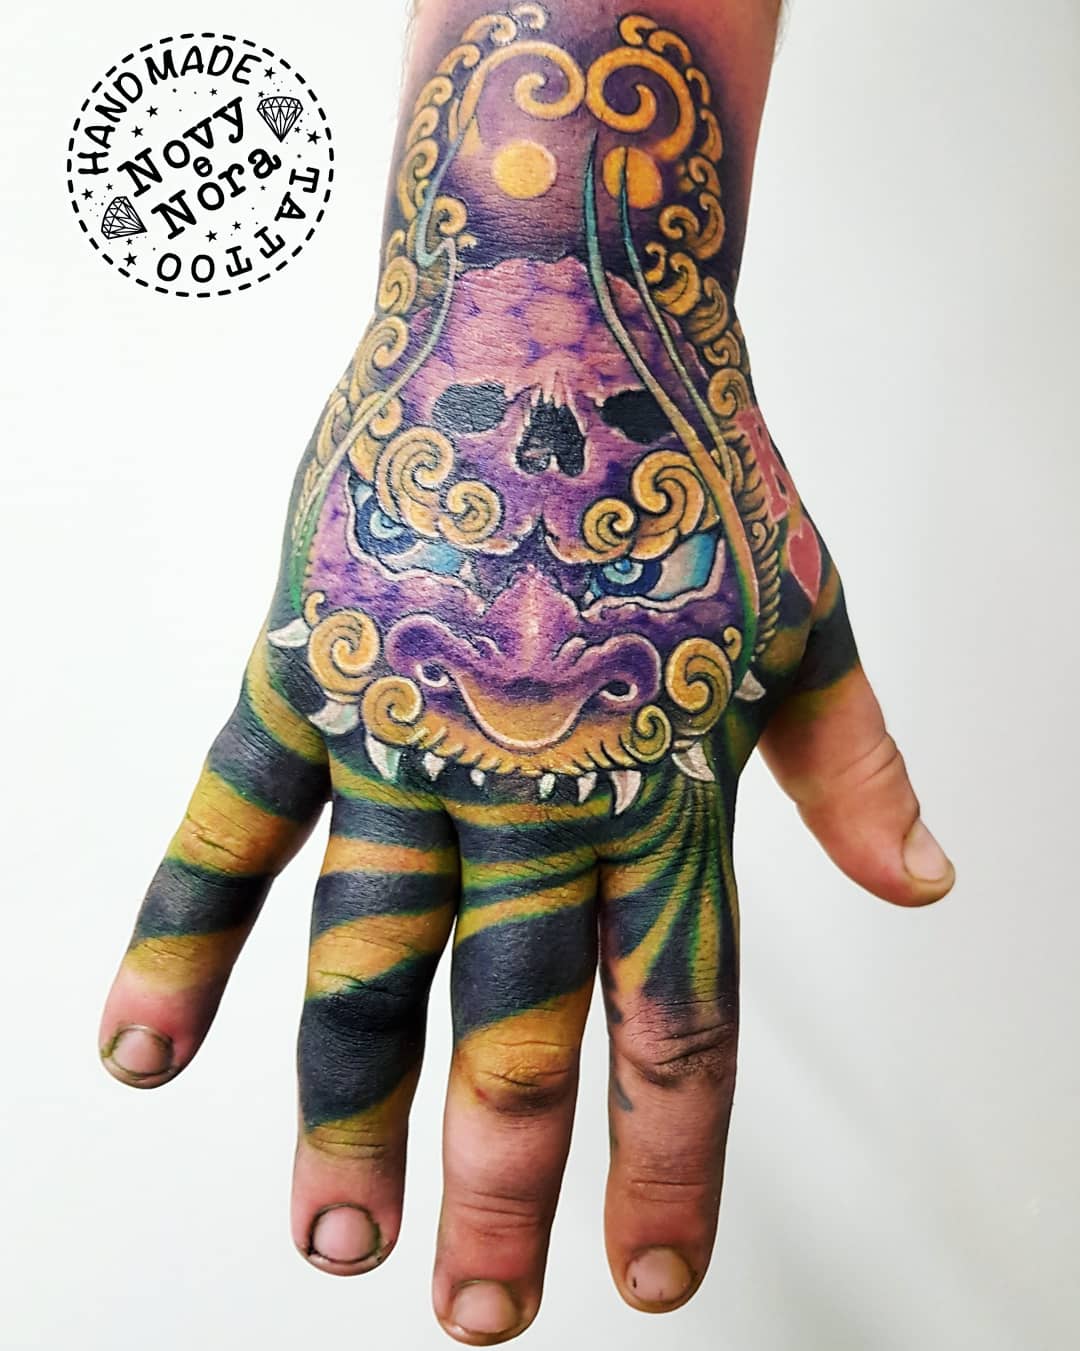 Excellent Hand Tattoos  Tattoo Ideas Artists and Models